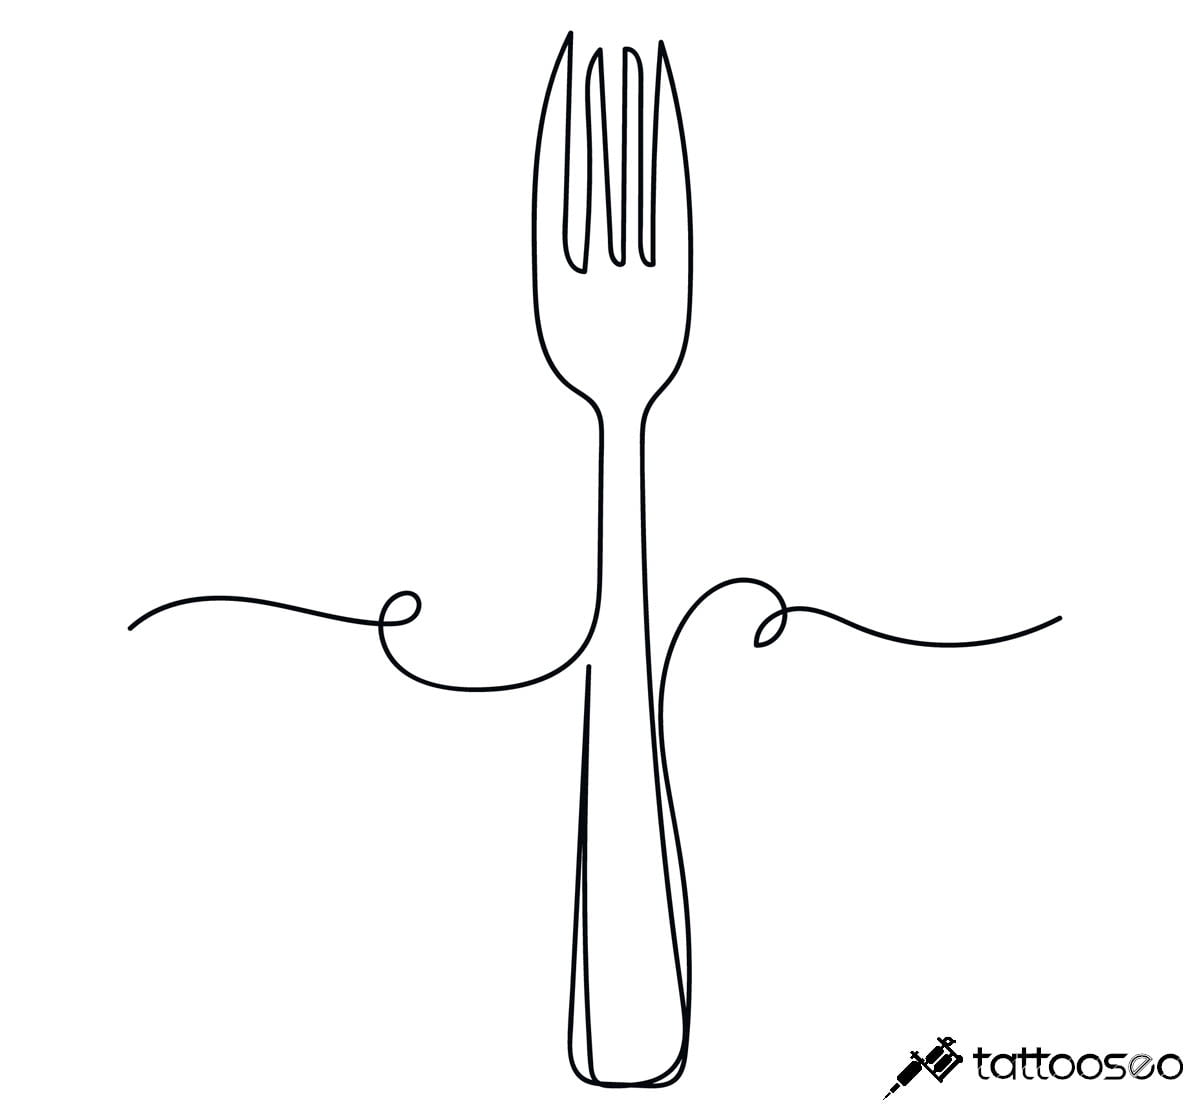 Fork tattoo meaning